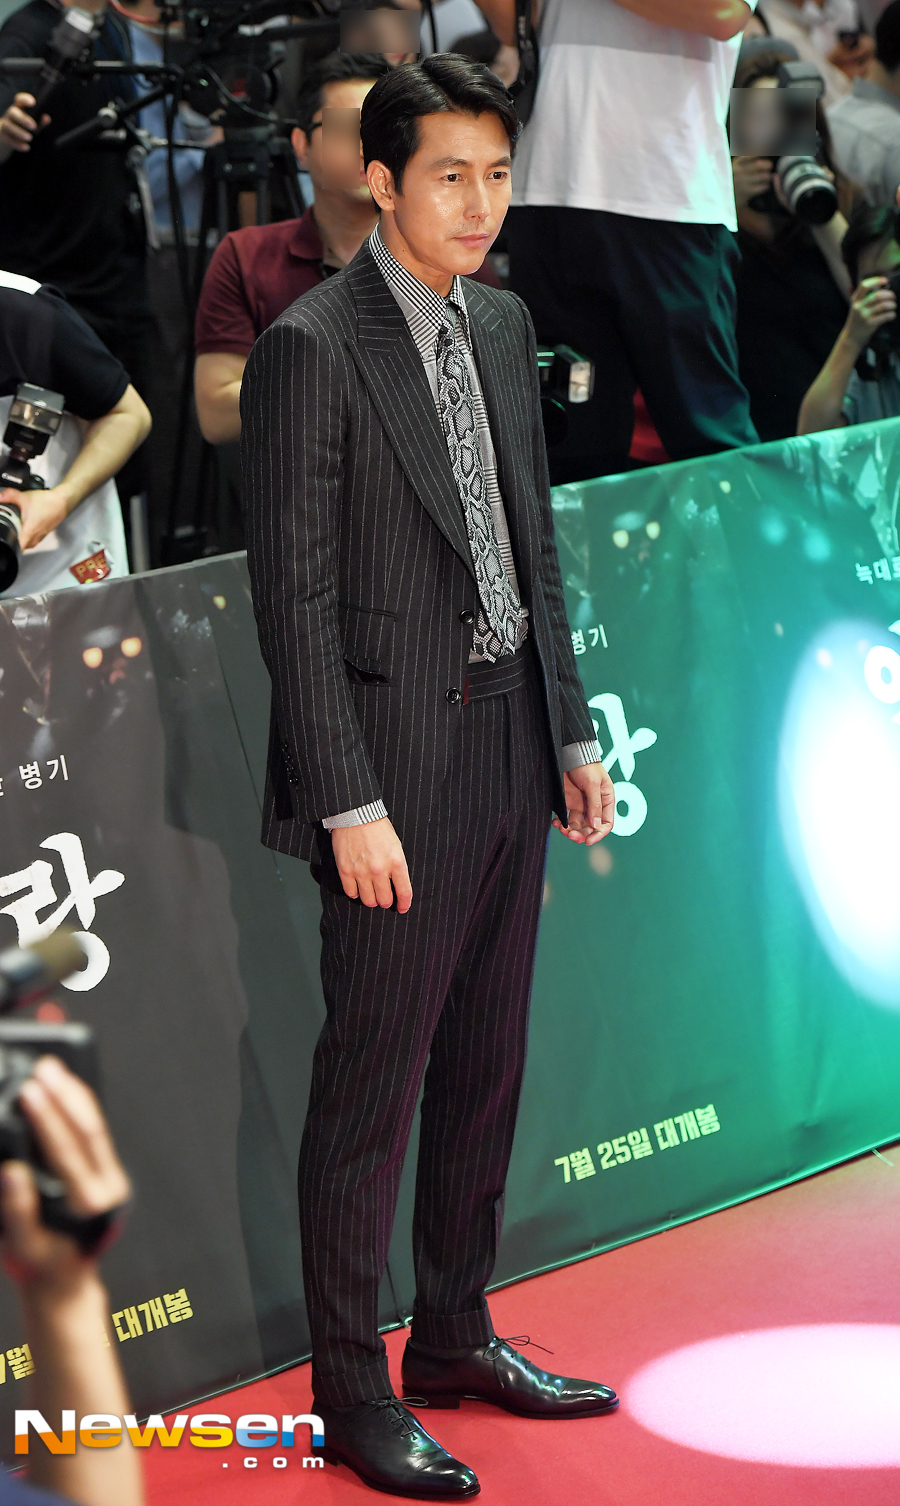 The movie Illang: The Wolf Brigade (director Kim Ji-woon) Red Carpet was held at Time Square in Yeongdeungpo-gu, Seoul on the afternoon of July 18.Jung Woo-sung stepped on Red Carpet on the day.The film Illang: The Wolf Brigade, starring actors Kang Dong-won, Han Hyo-joo, Jung Woo-sung, Kim Moo Yeol, Choi Min-ho (Shiny Minho), and Yeri Han, is a 2029 chaos in which anti-unification terrorist groups appeared after the two Koreas declared a five-year plan for unification. It will be released on July 25th as a film about the performance of the human weapon Illang: The Wolf Brigade, which is called the wolf in the breathtaking confrontation between absolute power institutions centered on Sabu.Jung Yu-jin